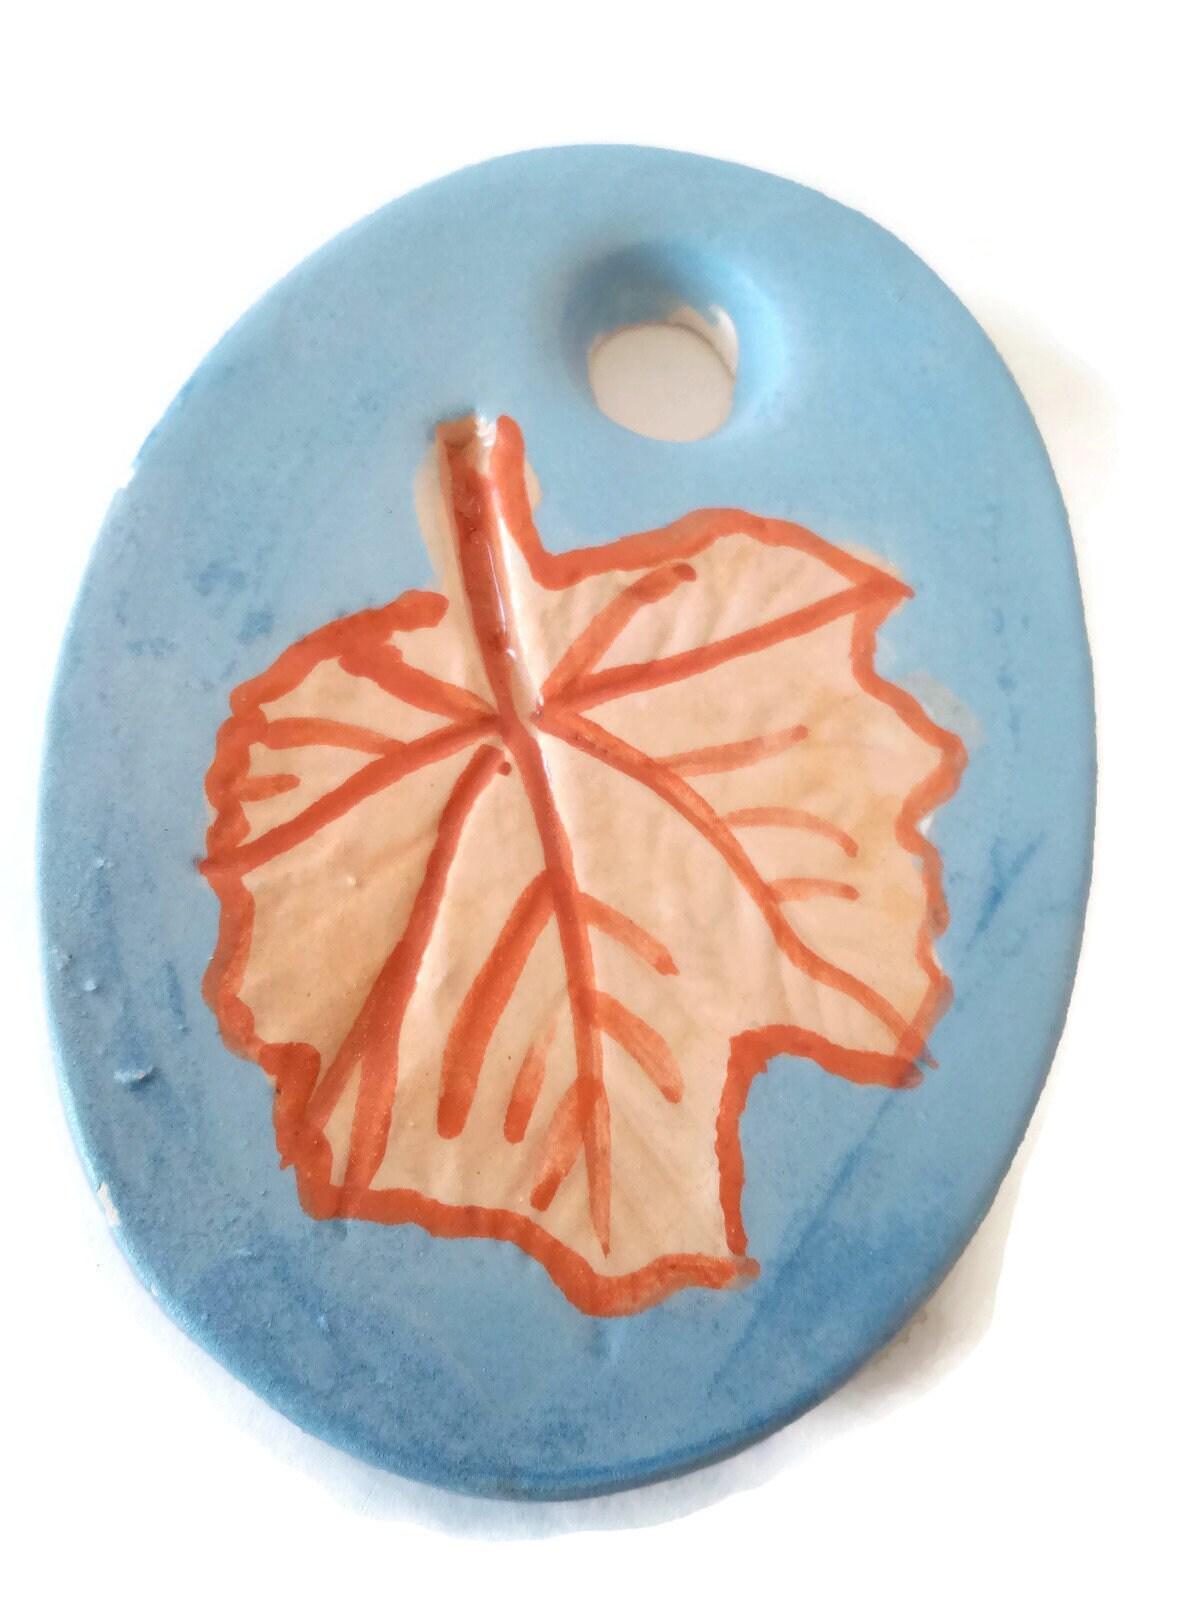 1Pc 80mm Extra Large Leaf Necklace Pendant For Jewelry Making, Handmade Ceramic Blue Oval Clay Charm For Unique Statement Jewelry - Ceramica Ana Rafael